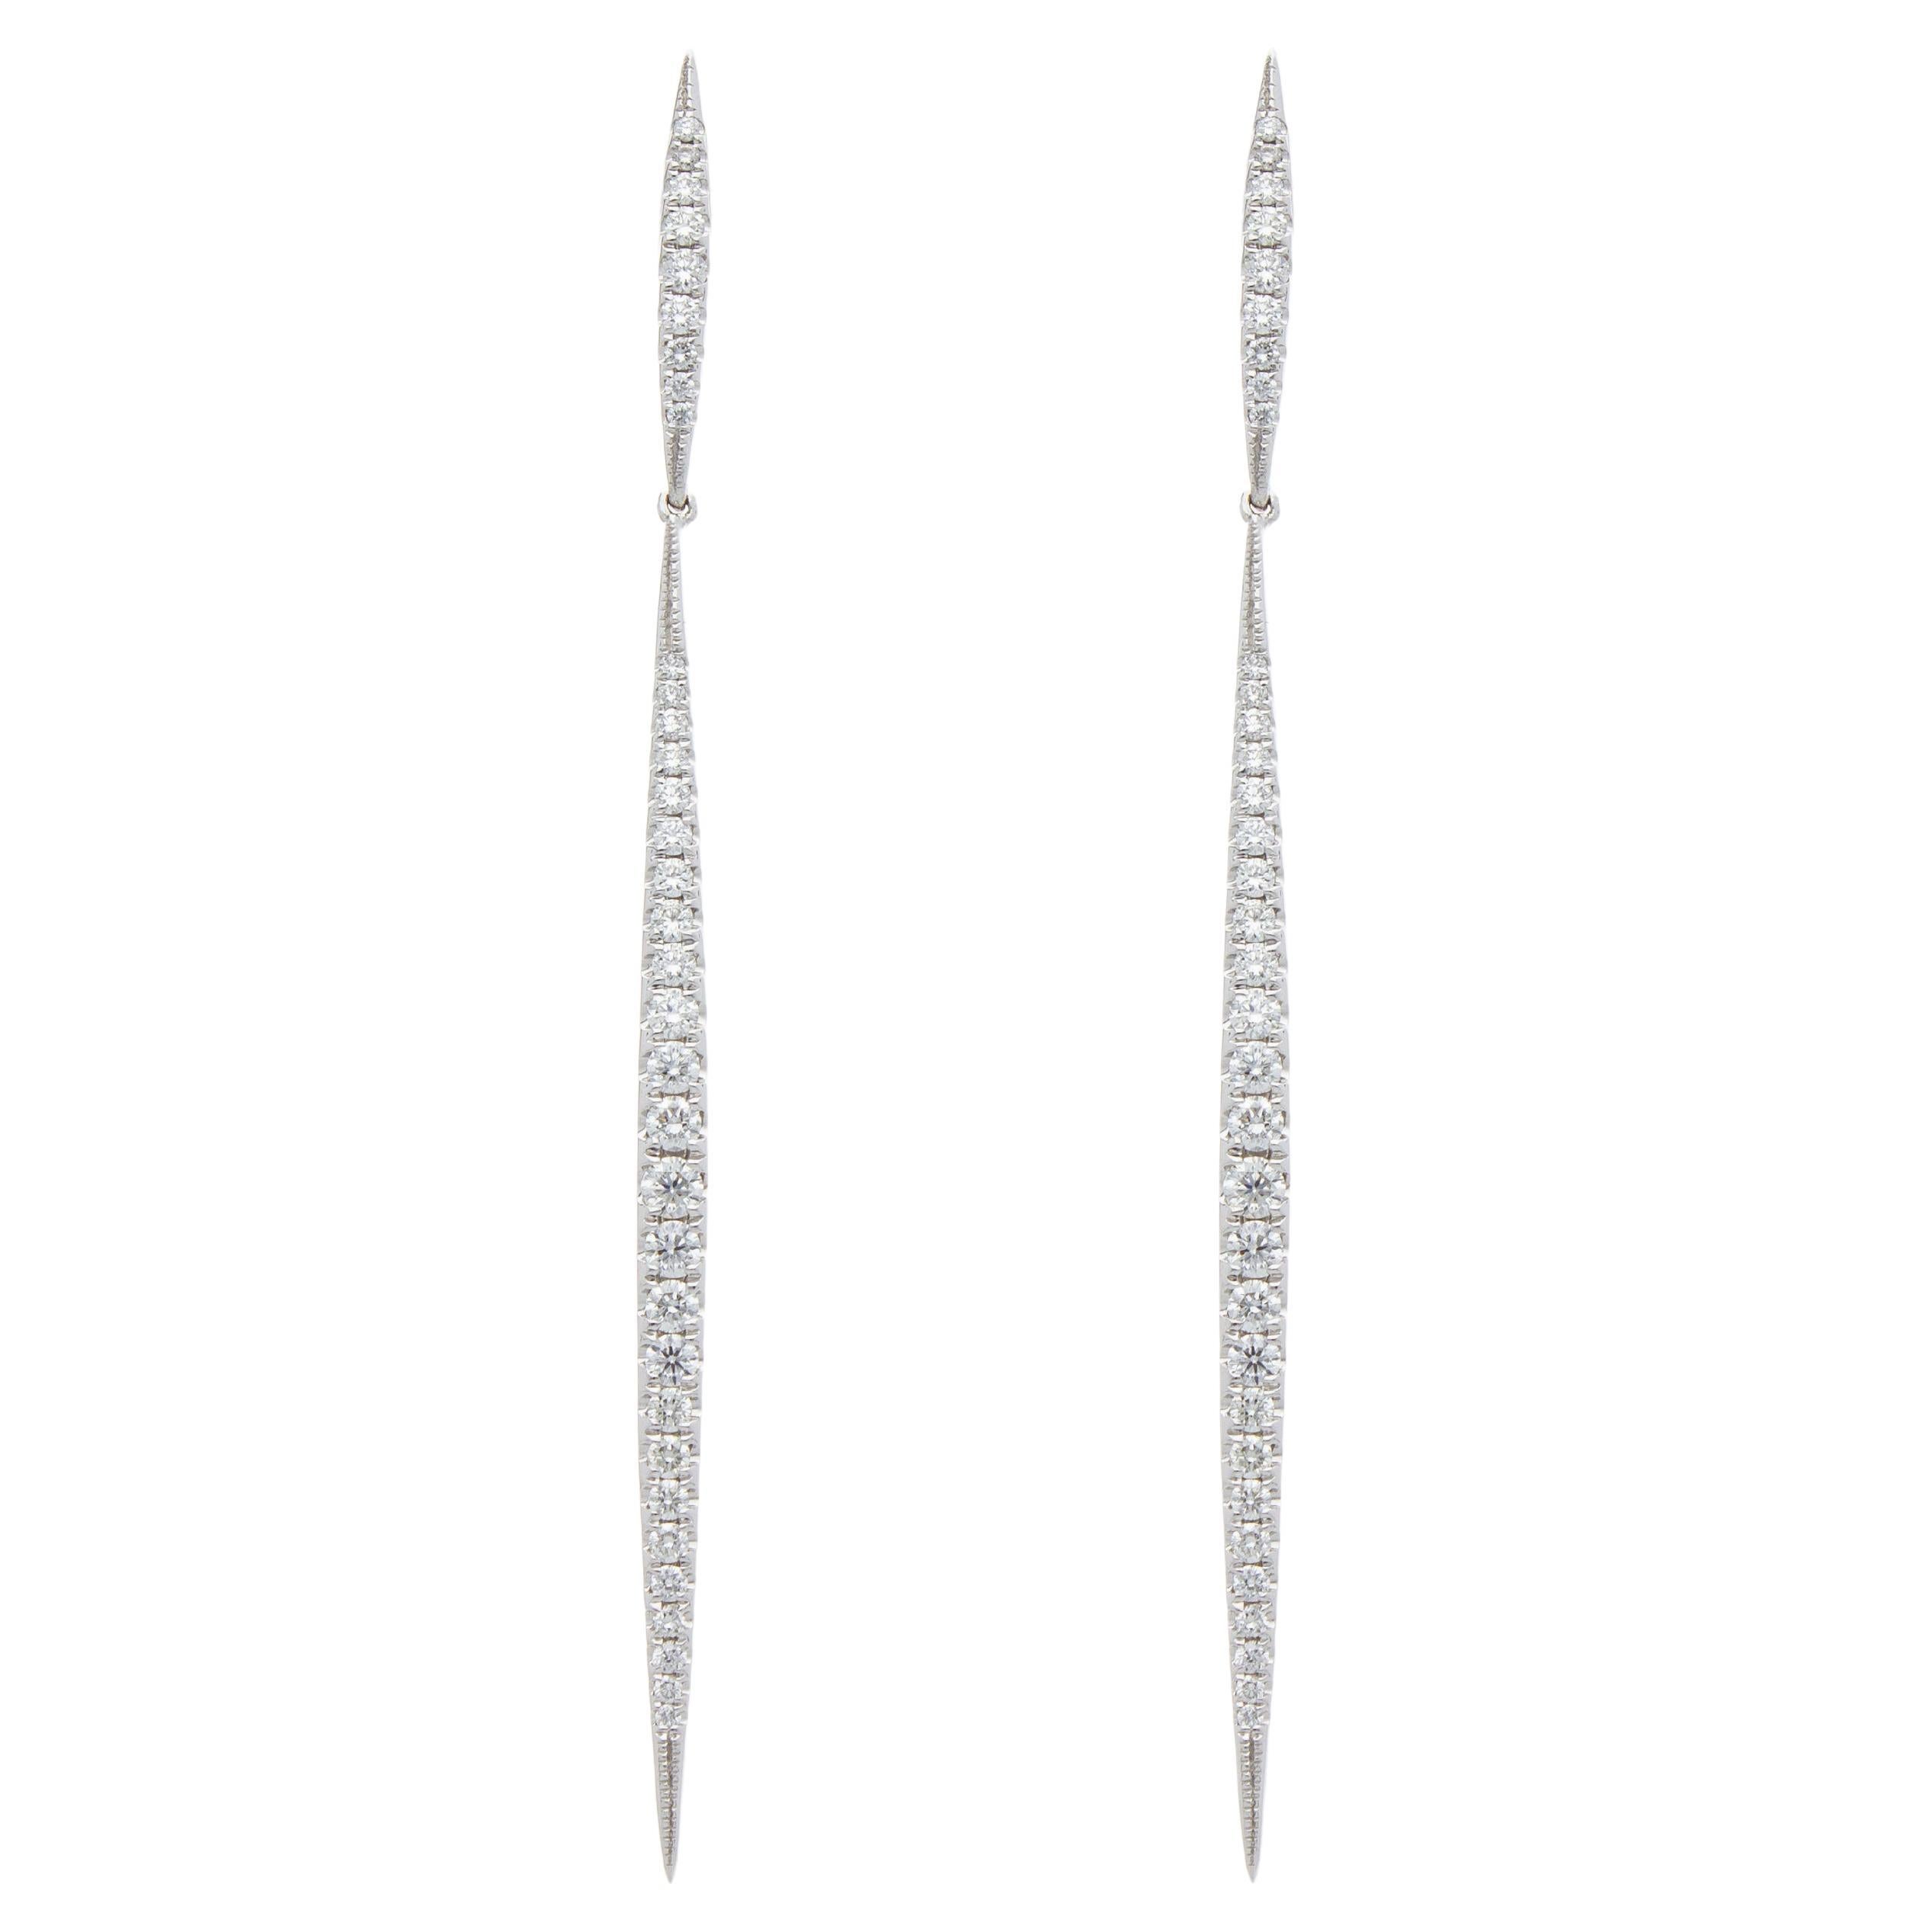 Earrings with 0.74 Ct of Gradated Diamonds, on Hanging Bars, 18 Kt White Gold